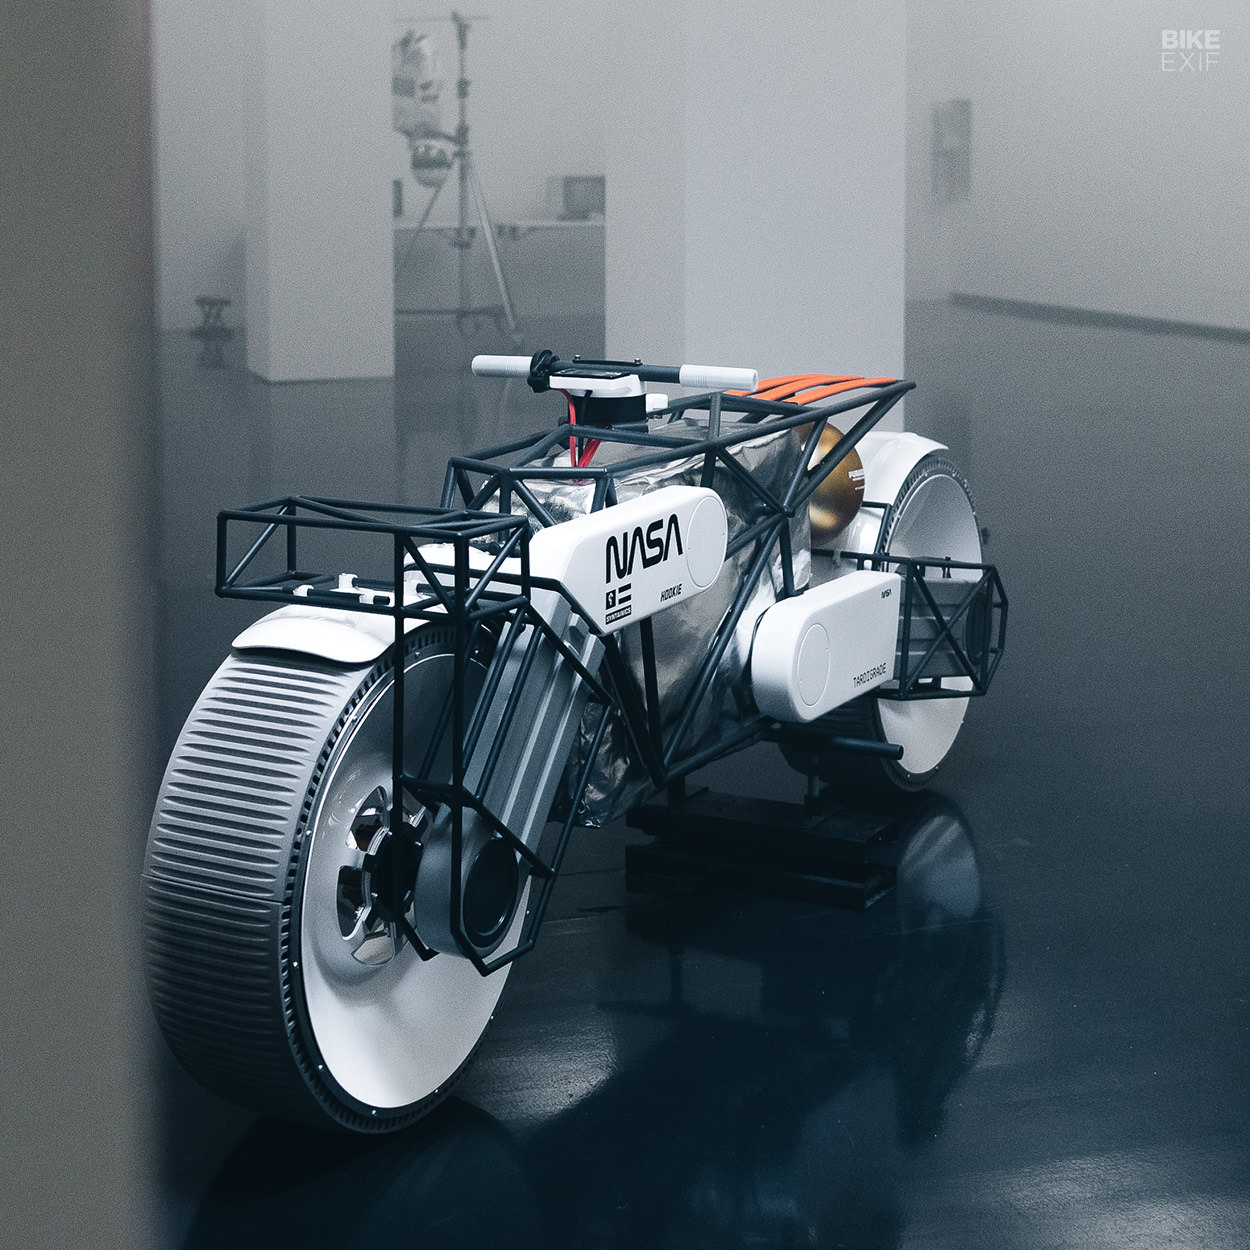 The Tardigrade moon rover motorcycle by Hookie Co.